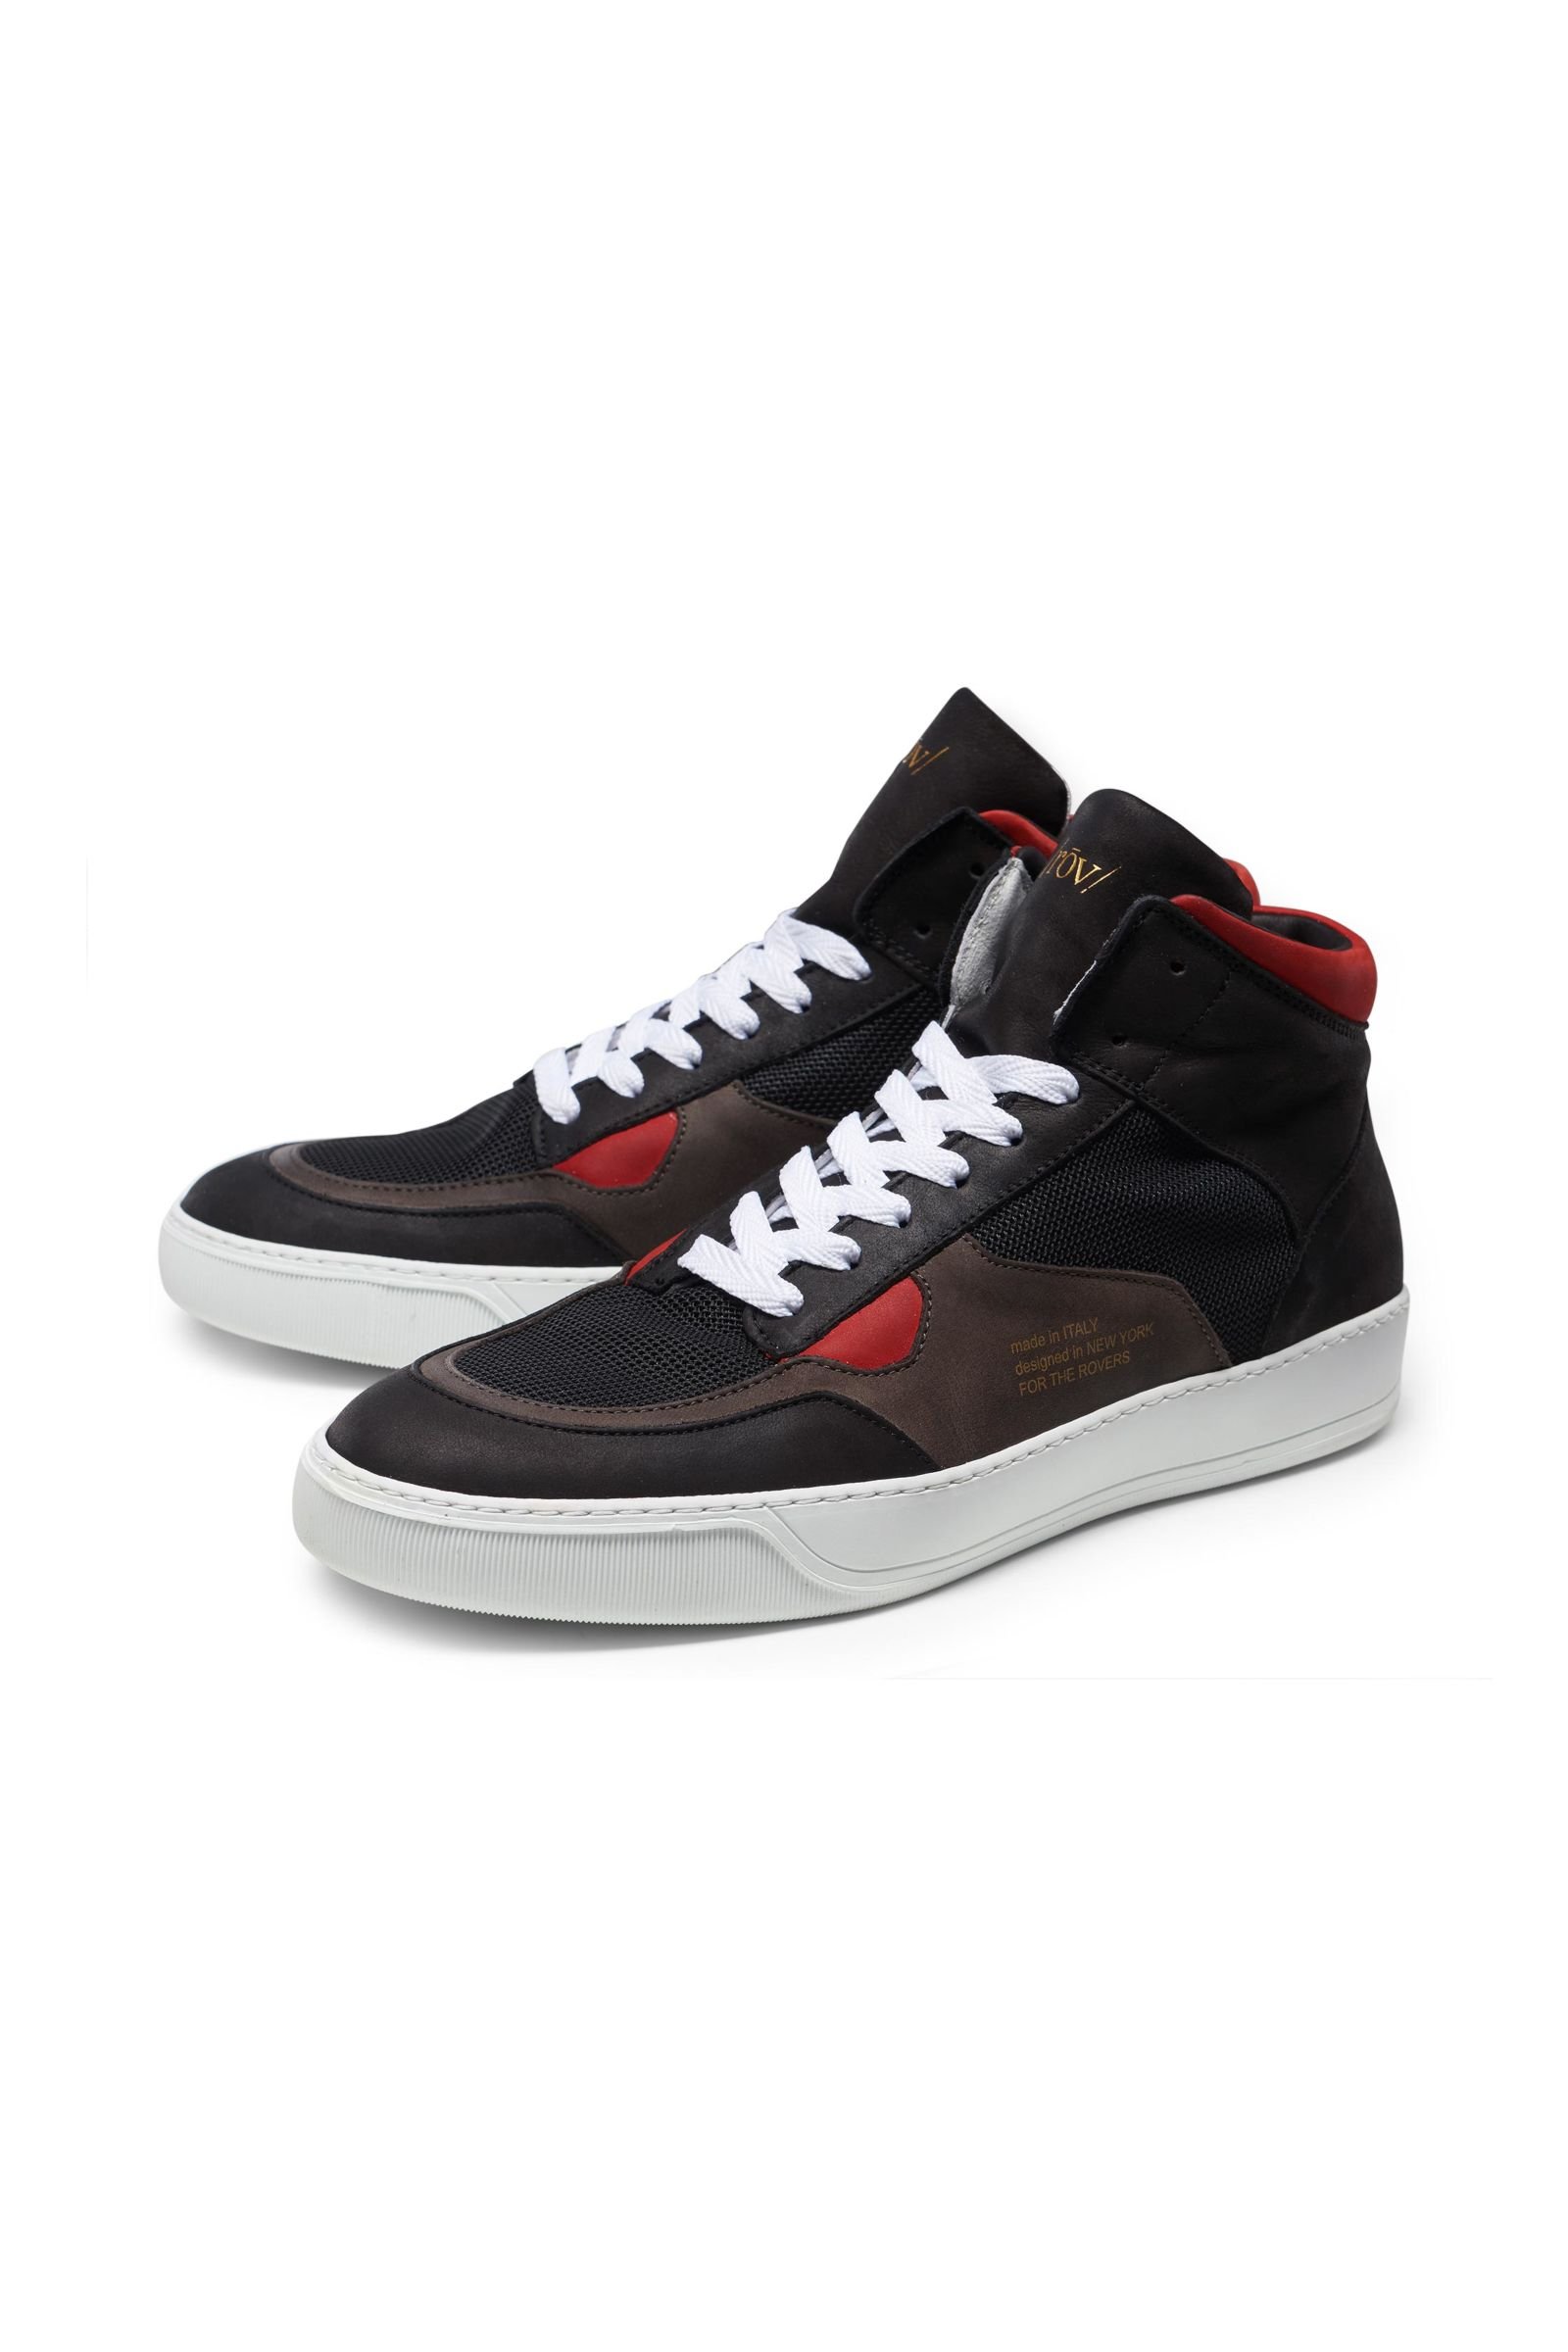 Sneakers 'Play Top Fashion 6' black/red